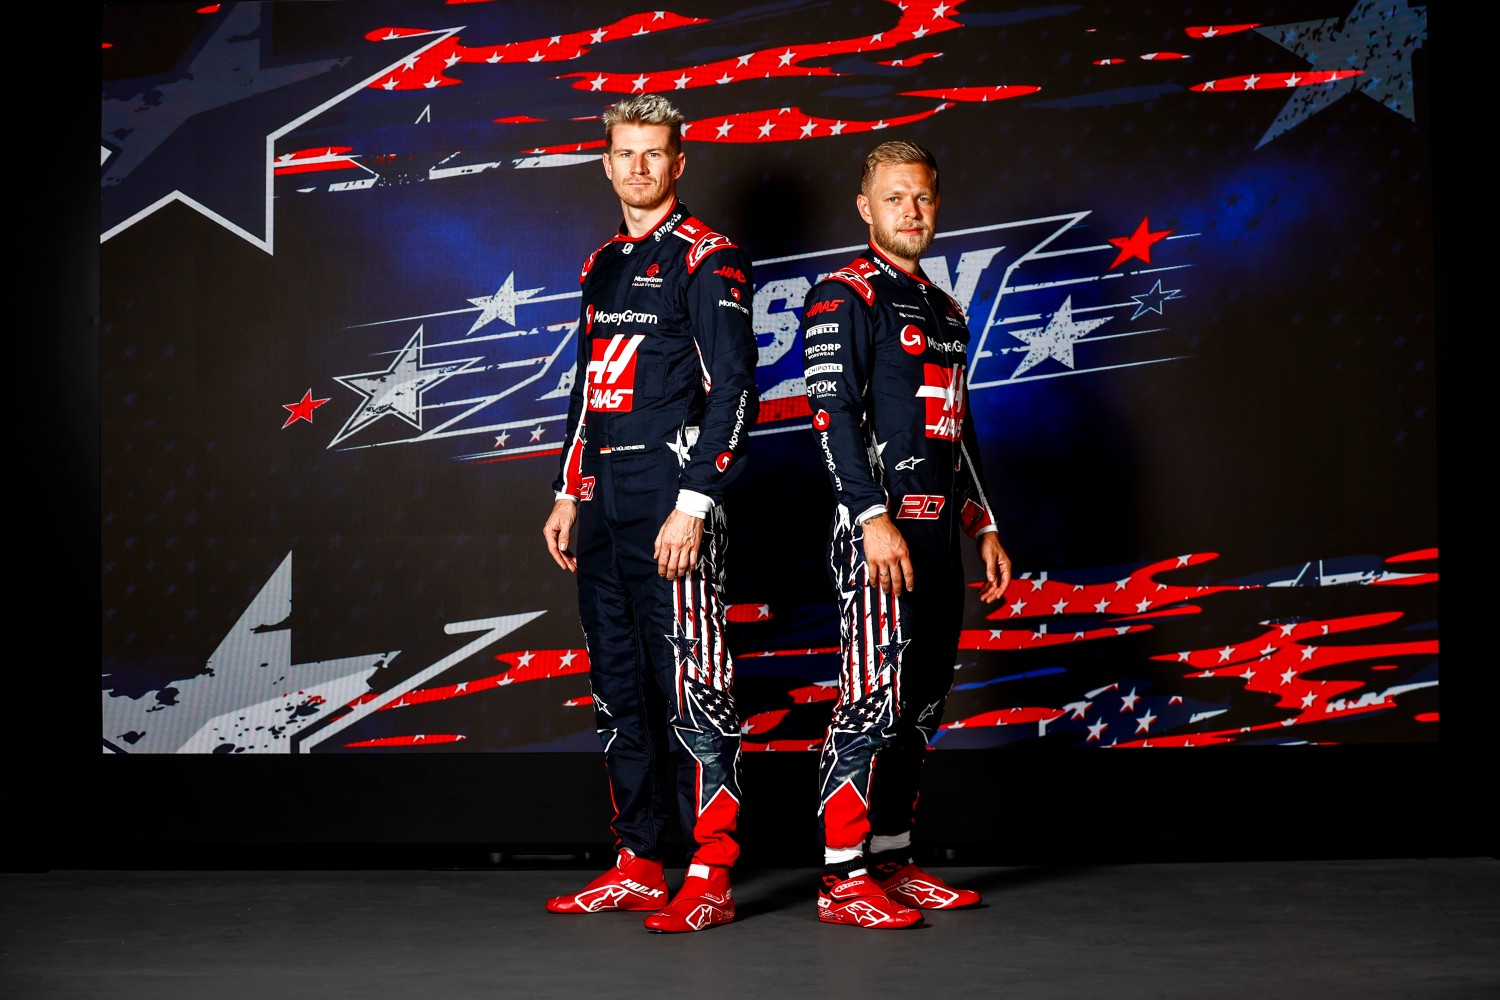 The Haas driver suits will look different too.